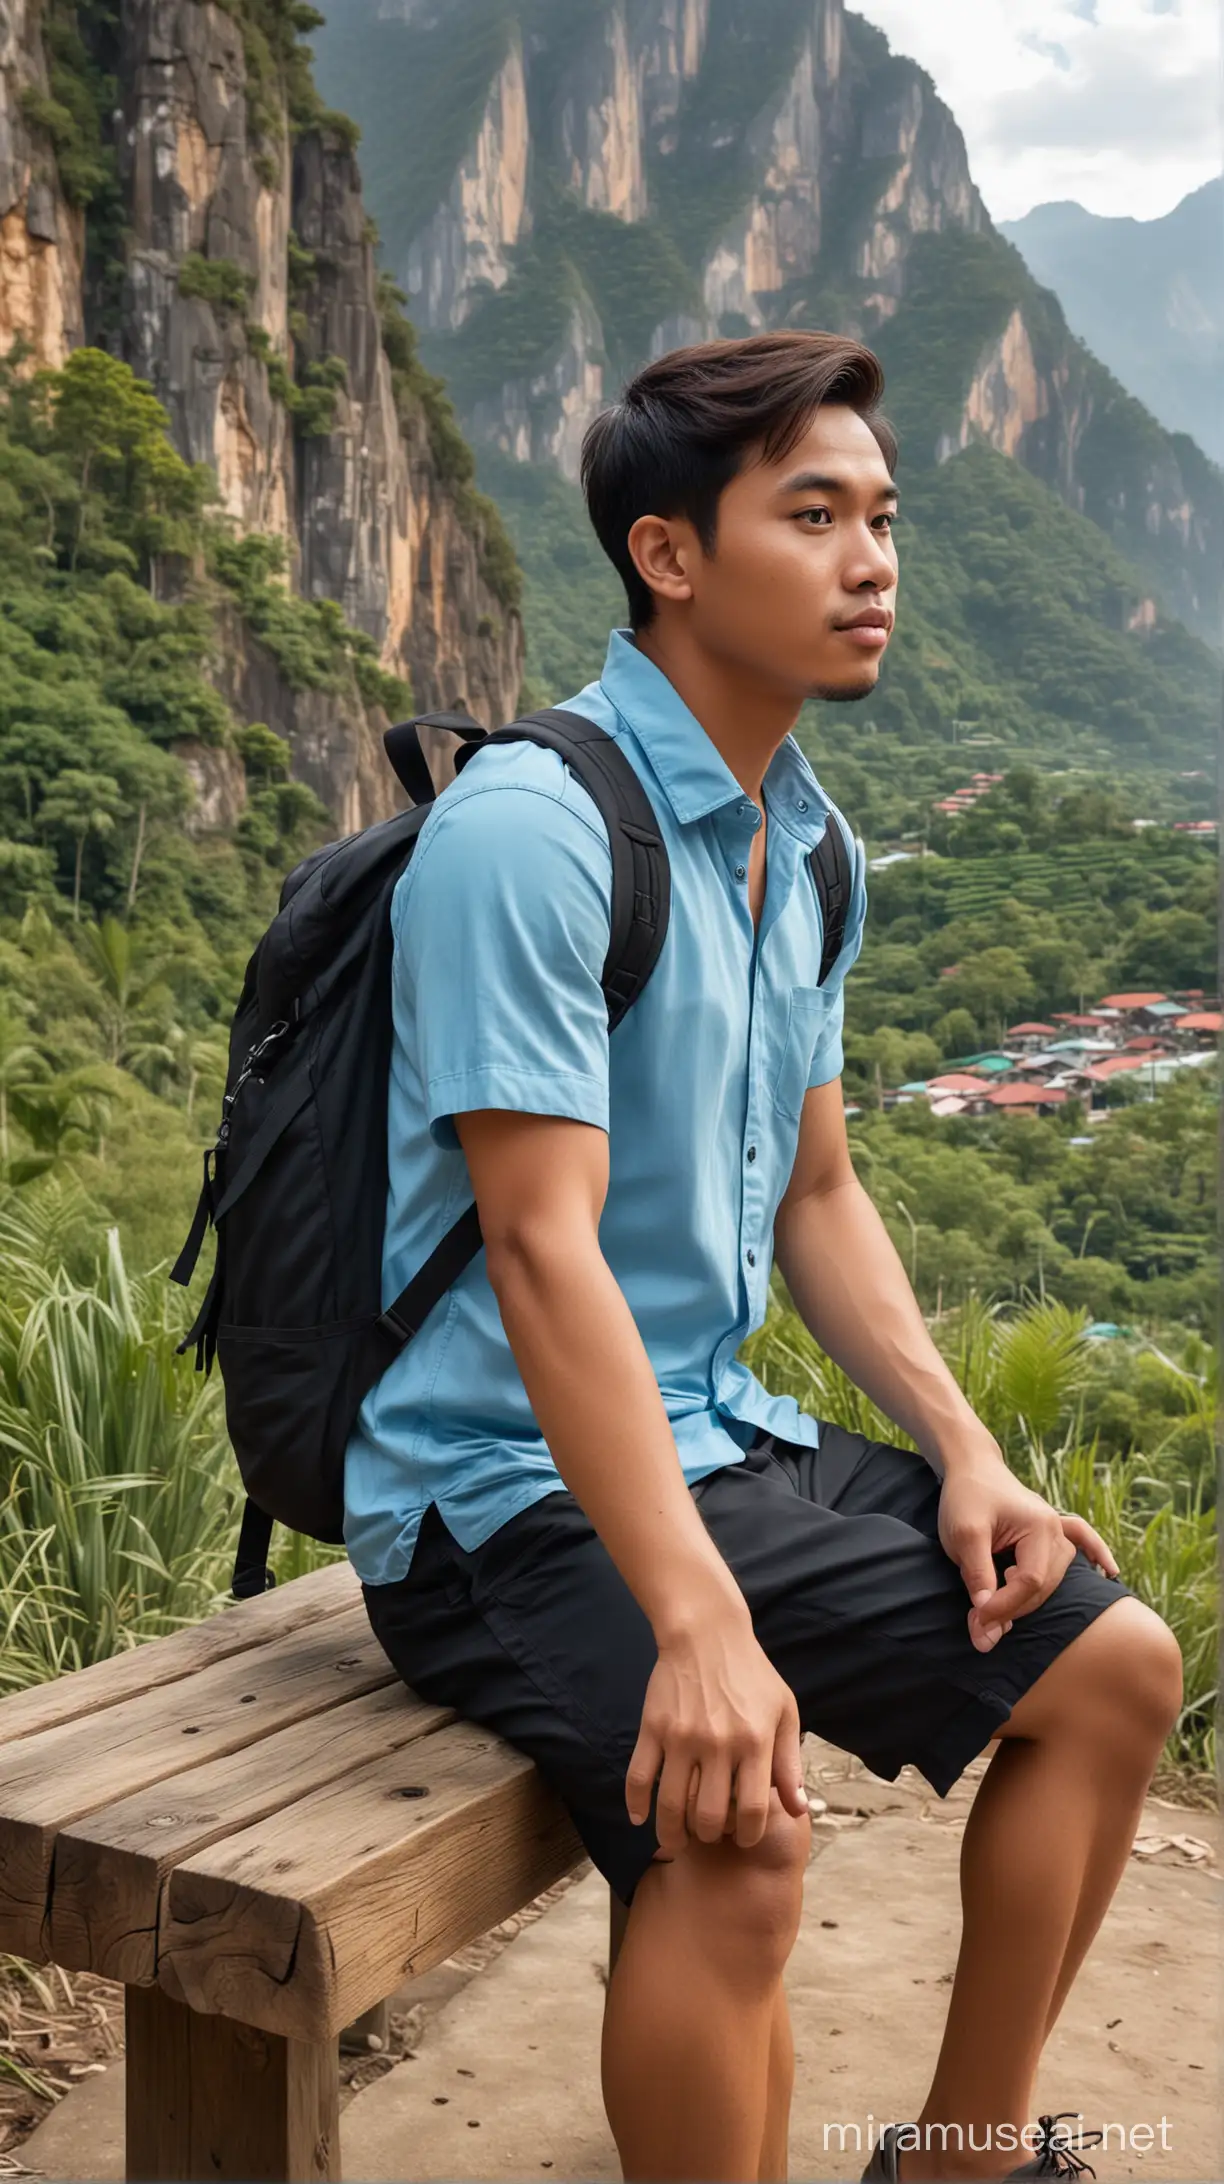 Chubby Indonesian Man Relaxing on Wooden Bench with Mountain Cliff Background